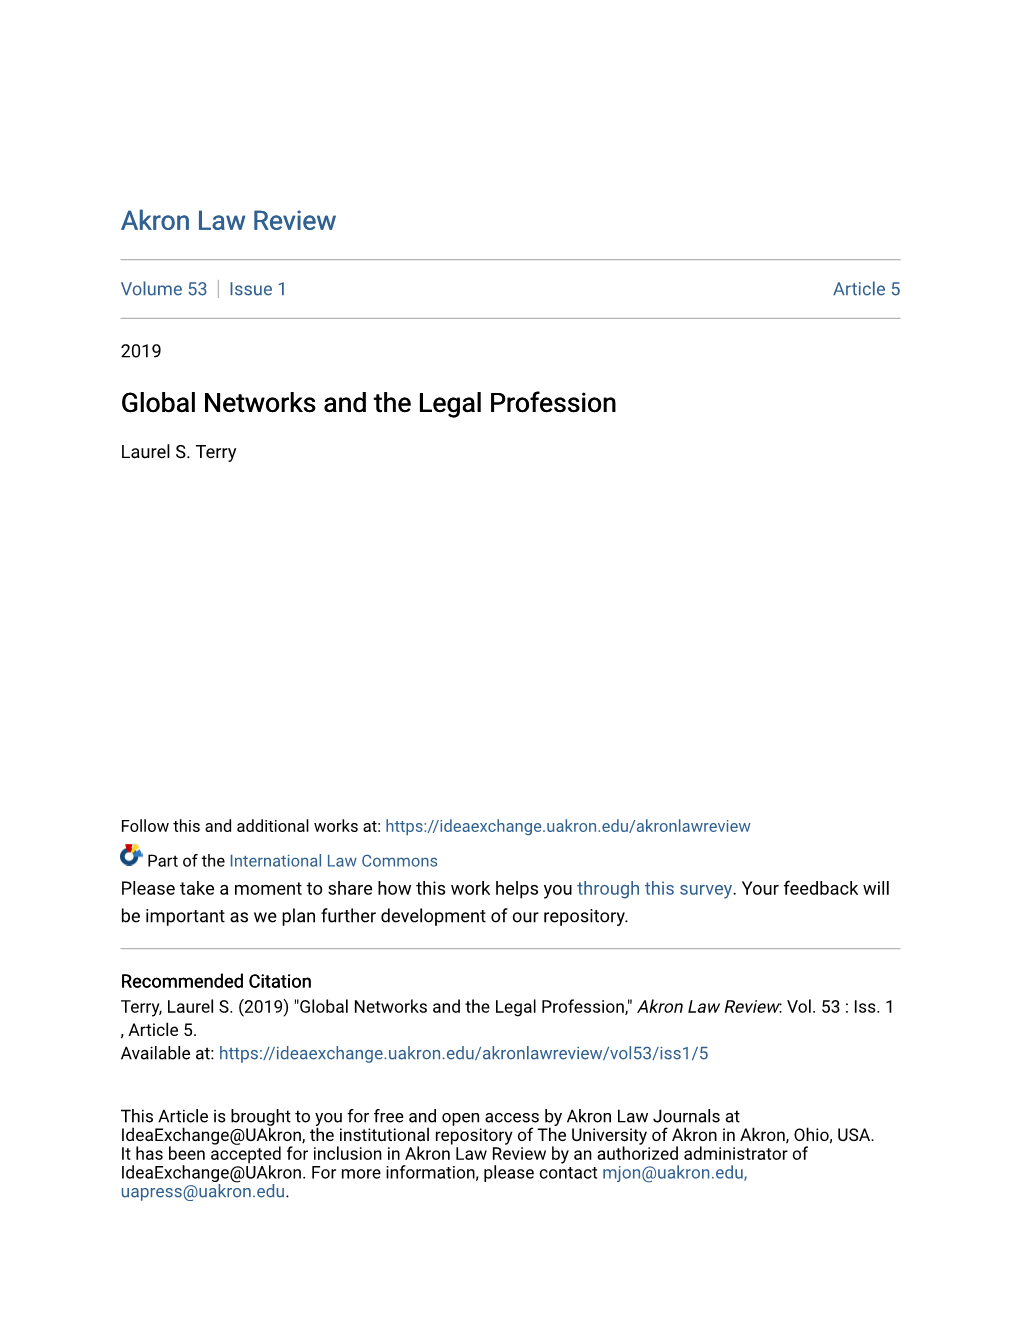 Global Networks and the Legal Profession